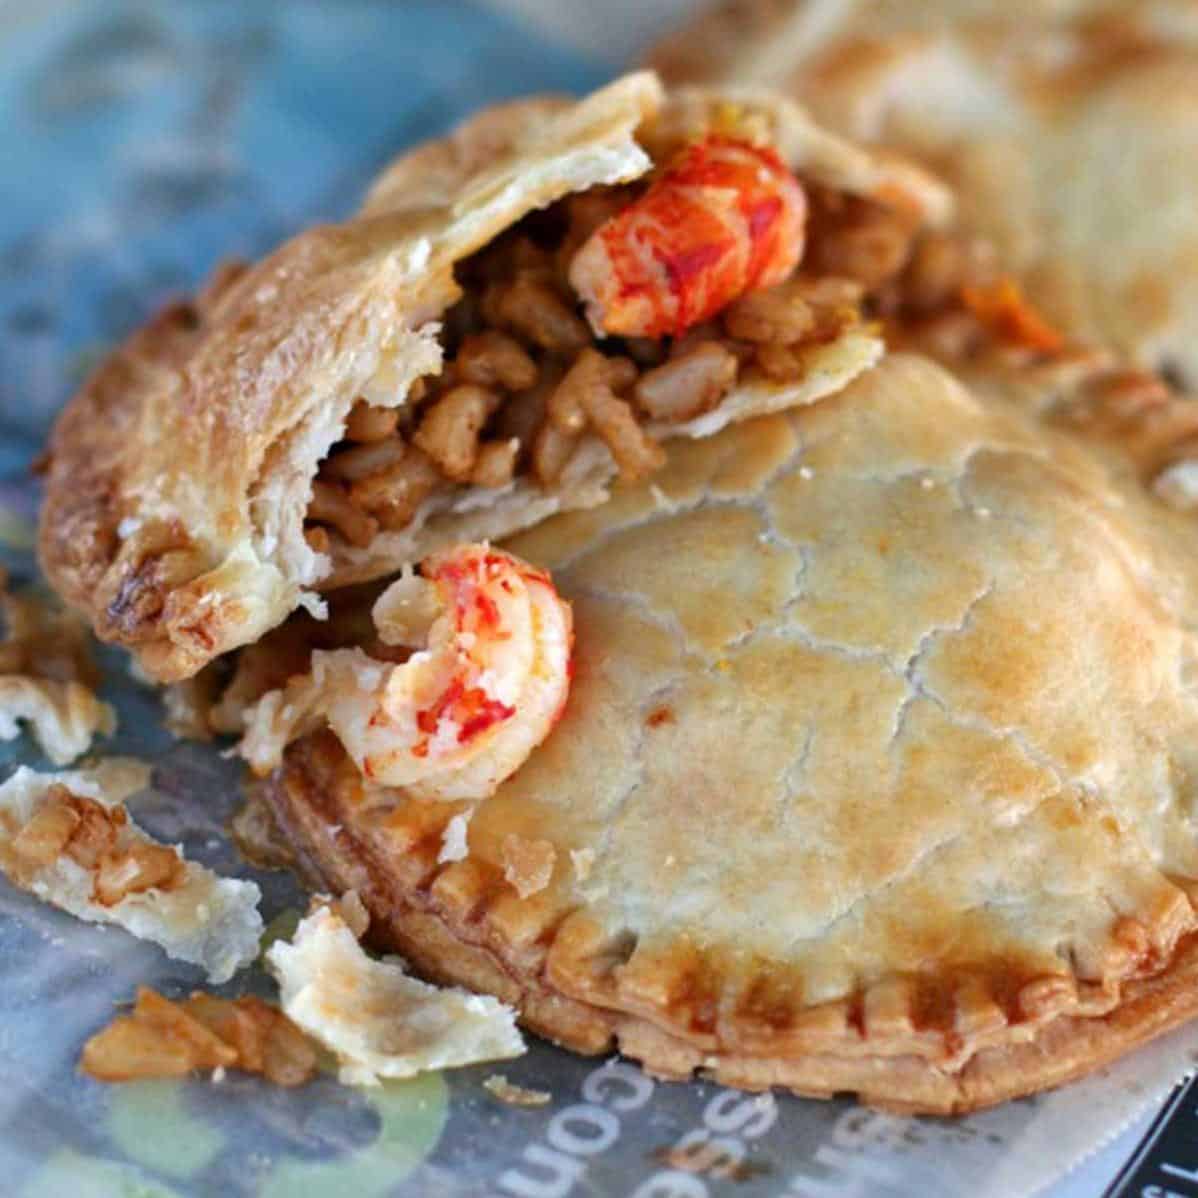  The flaky crust of this crawfish pie is a buttery delight.